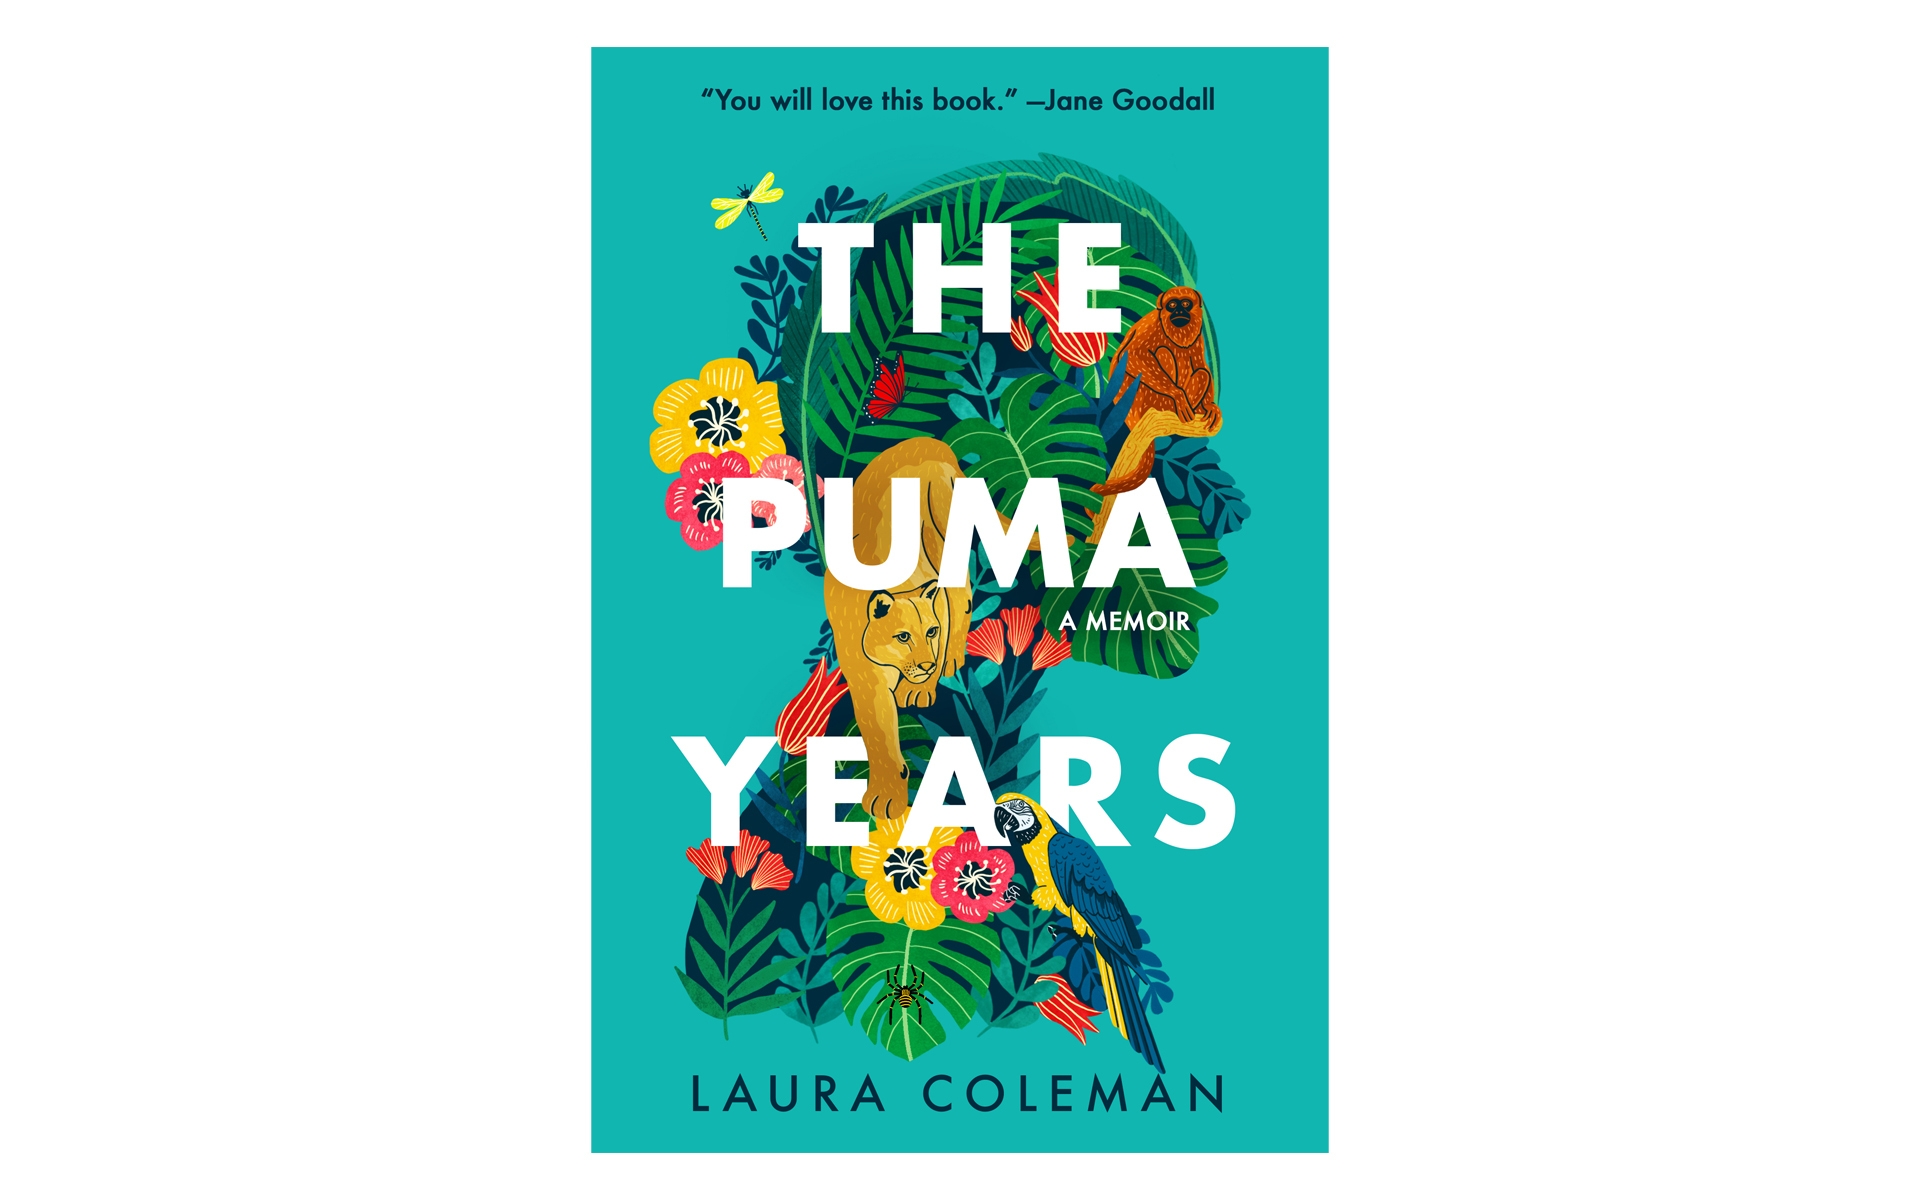 The cover art for the book "The Puma Years"